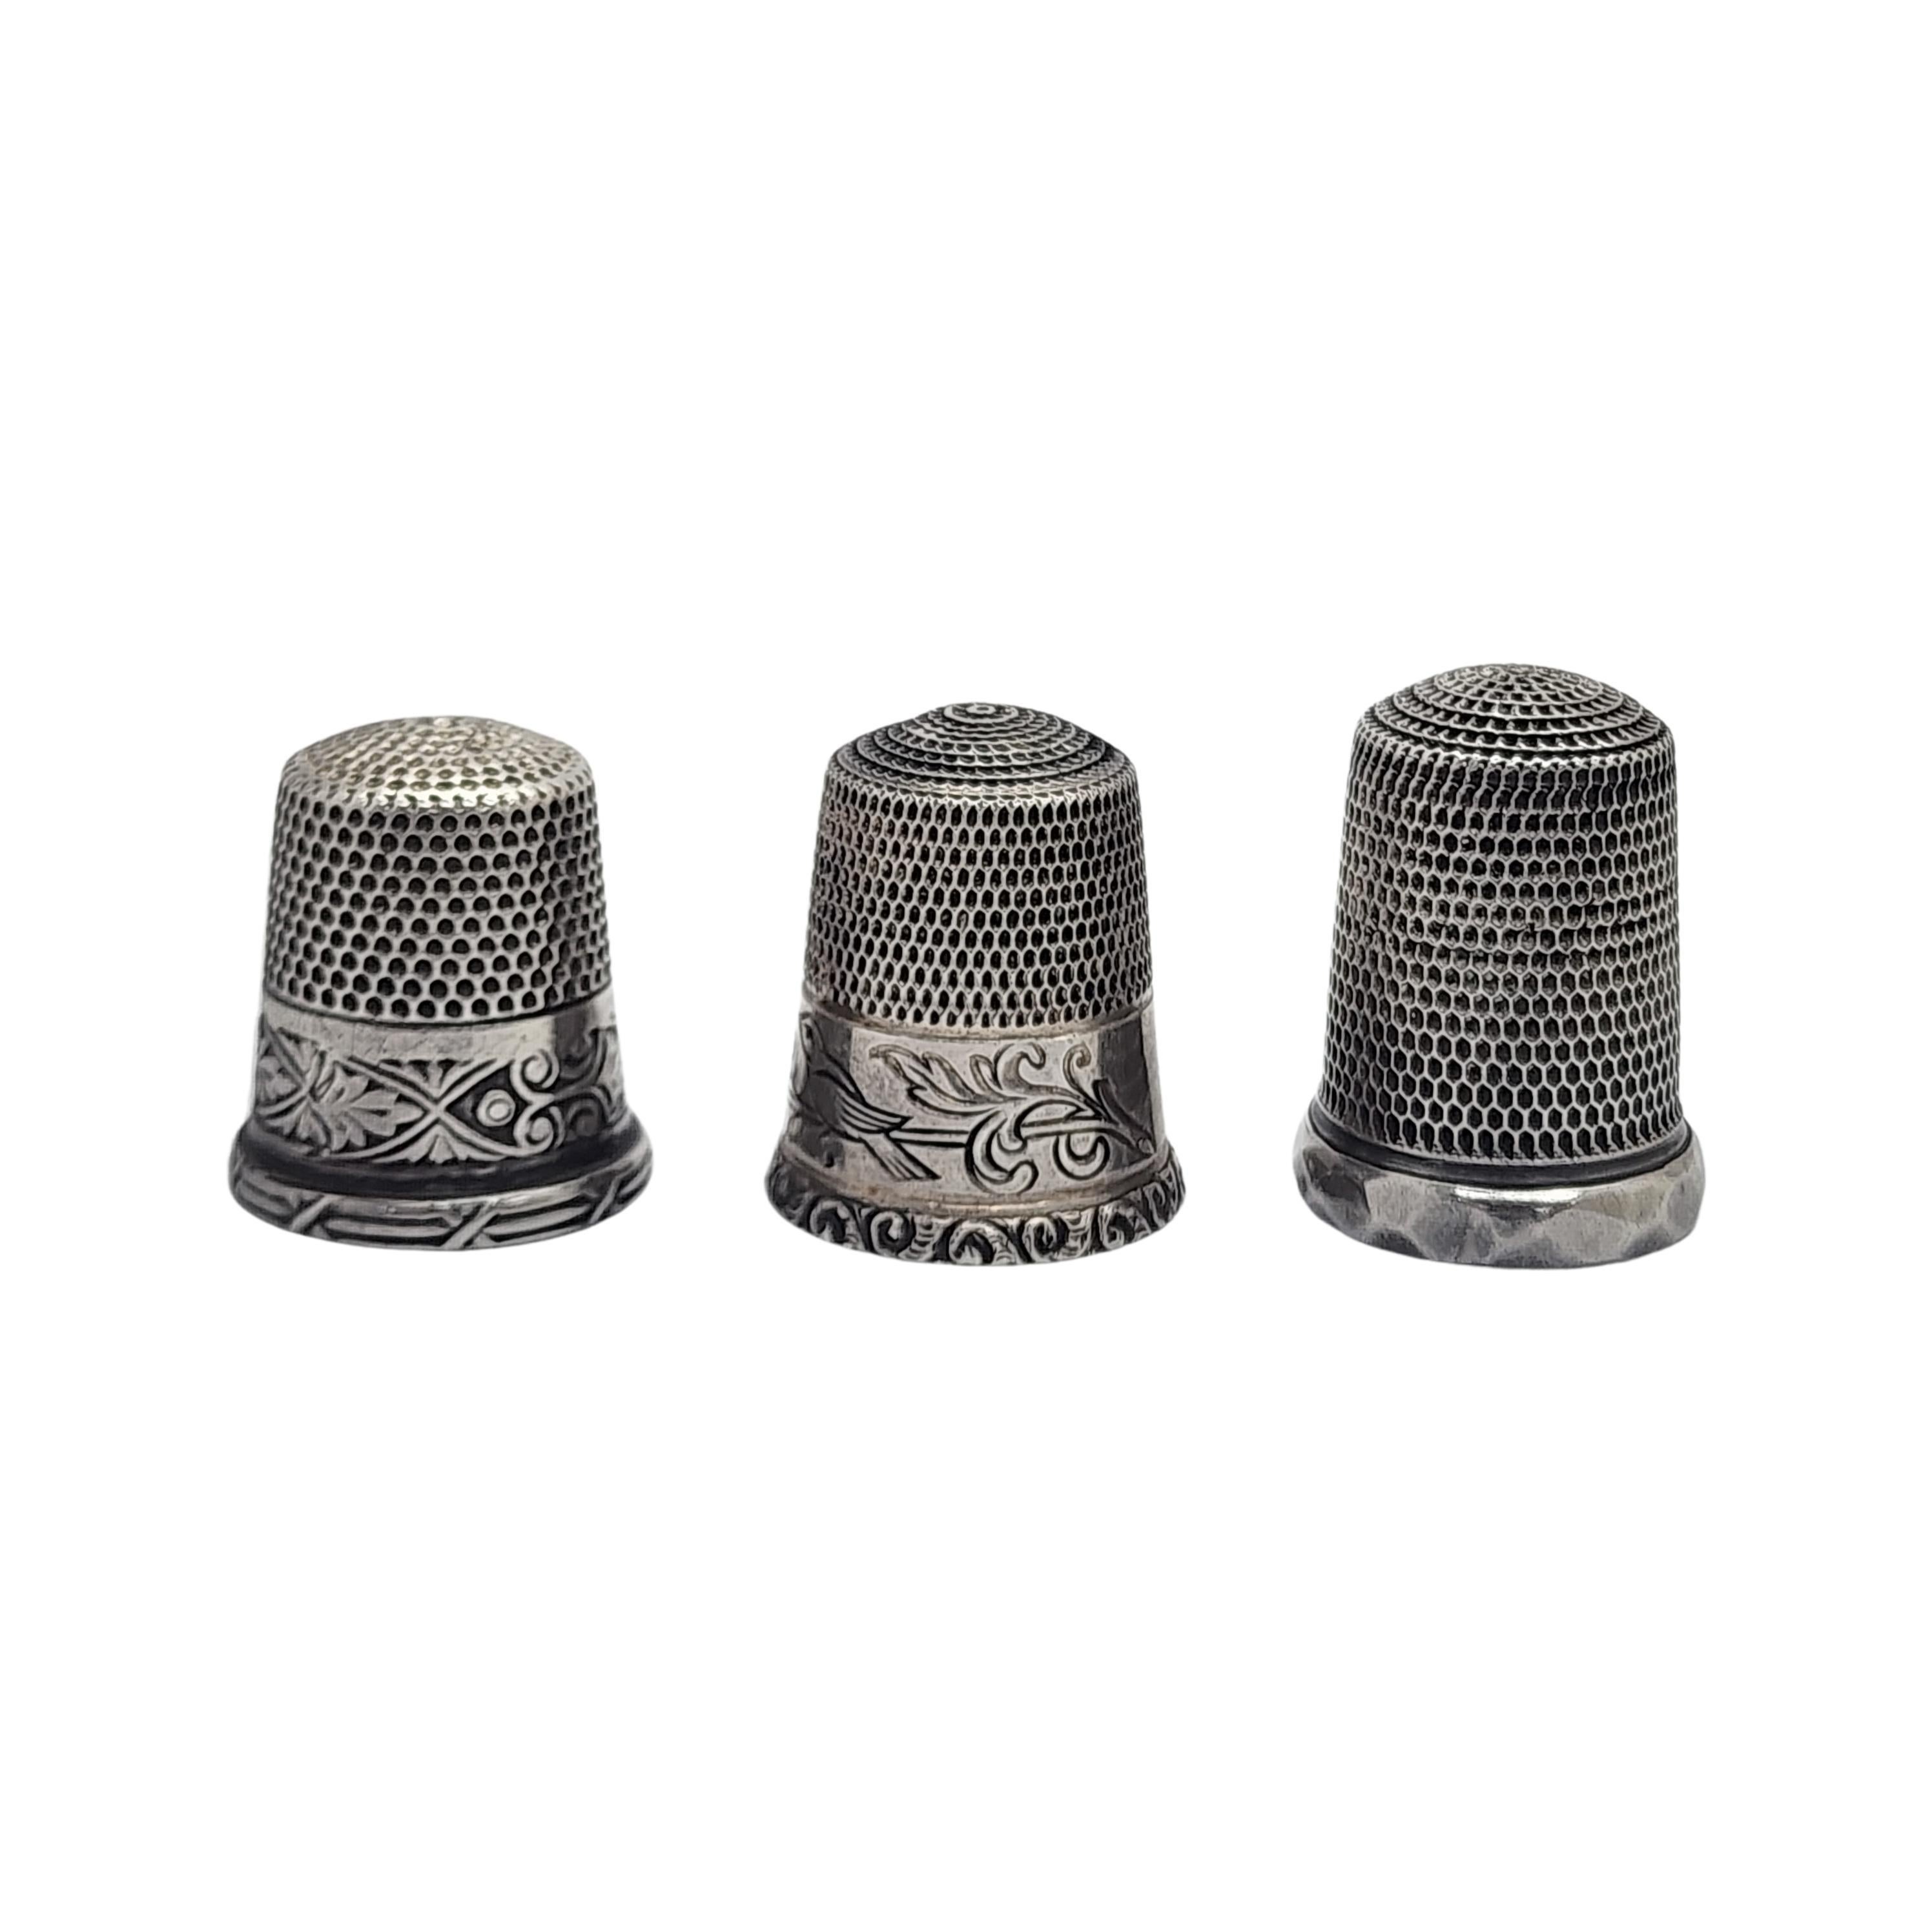 Set of 3 sterling silver thimble by Simon Bros Sizes 10 and 11.

2 thimbles feature an etched band along the bottom and 1 features a hammered rim.

The thimble with the birds is a size 11, measures approx 3/4